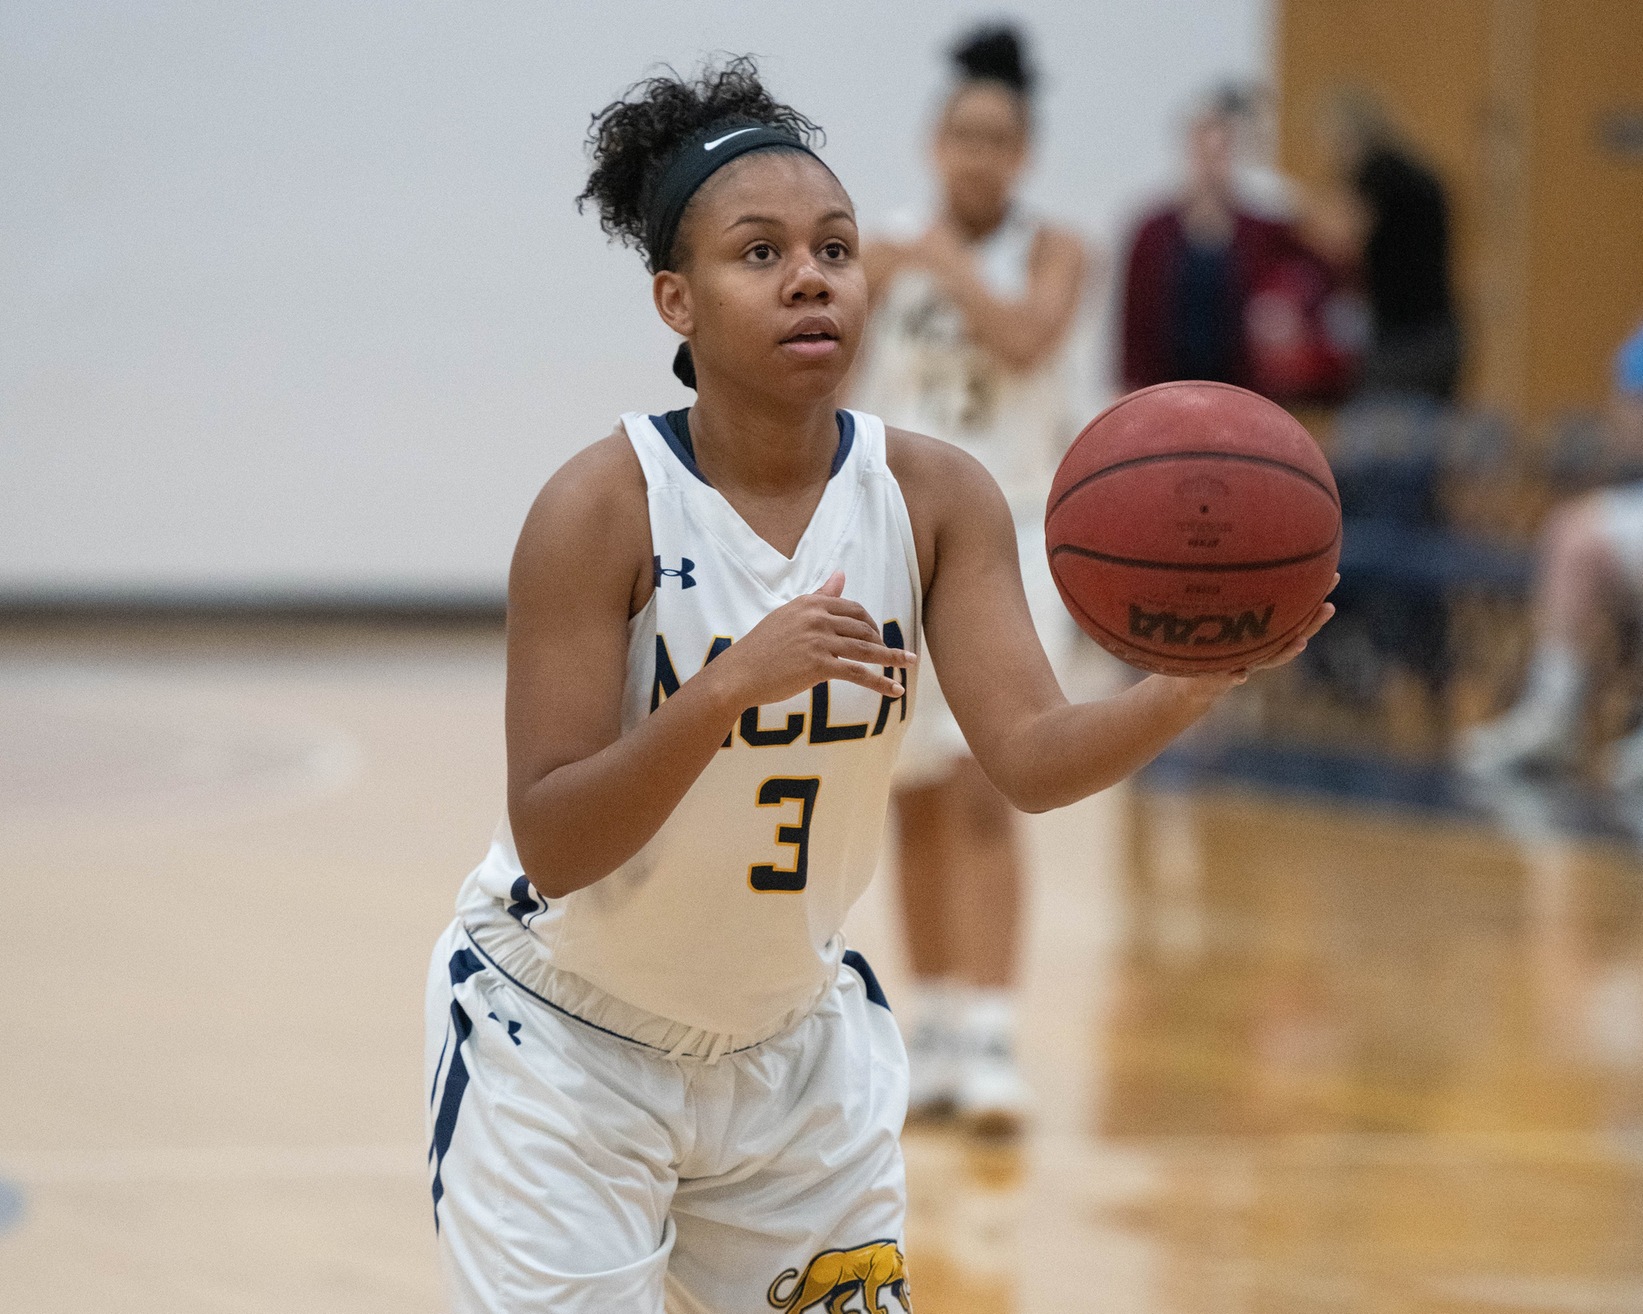 Women's Basketball loses defensive struggle with Trinity 43-31